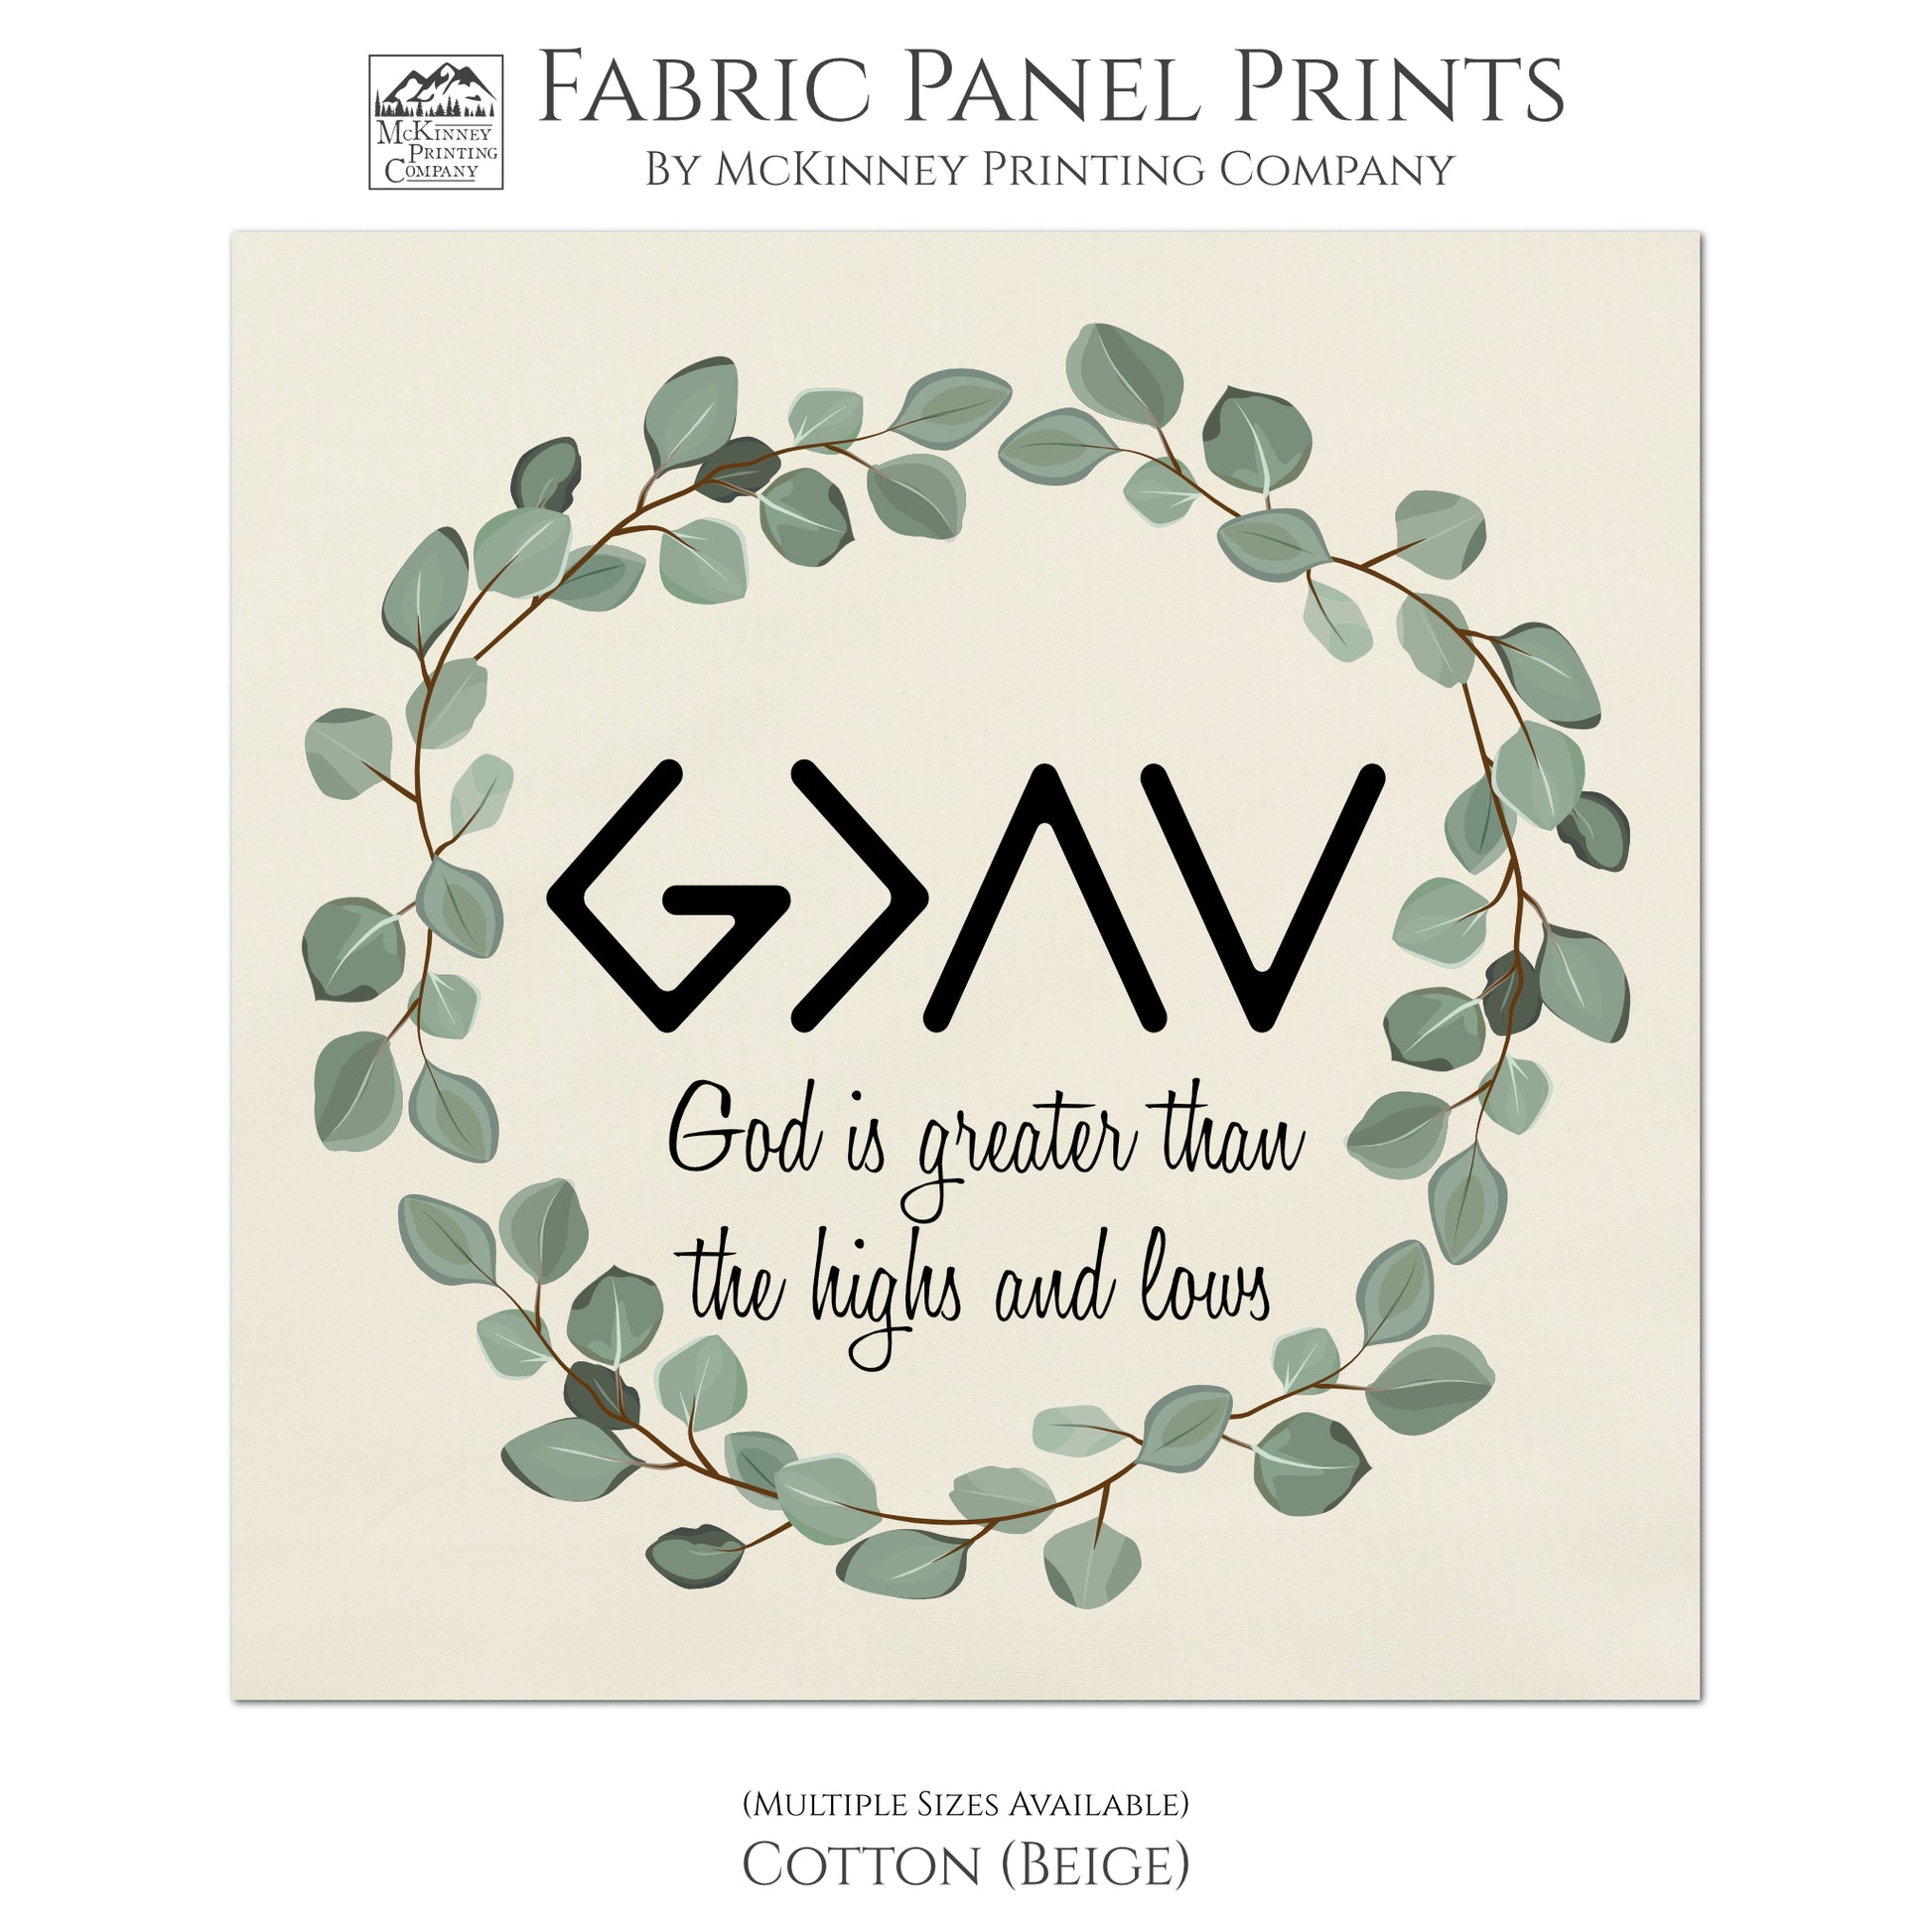 God is Greater than the Highs and Lows - Religious Fabric, Christian, Quilt Block, Wall Art - Quilting, Crafts, Pillow, Towel - Cotton